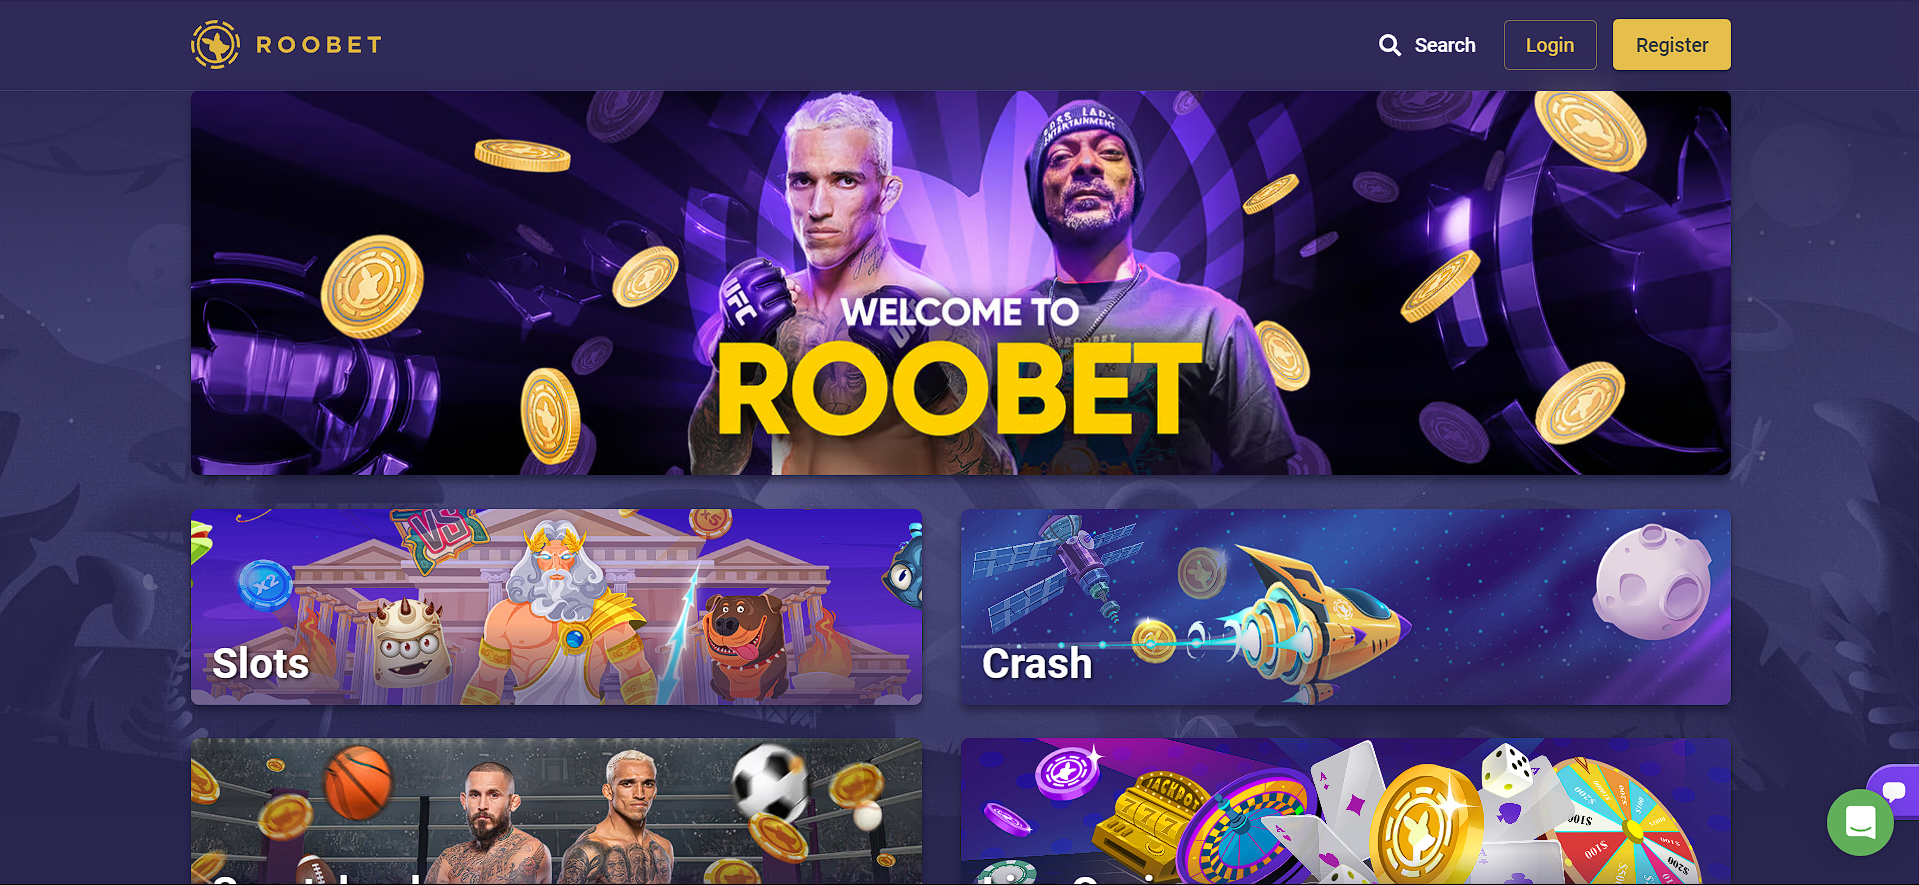 What is Roobet?